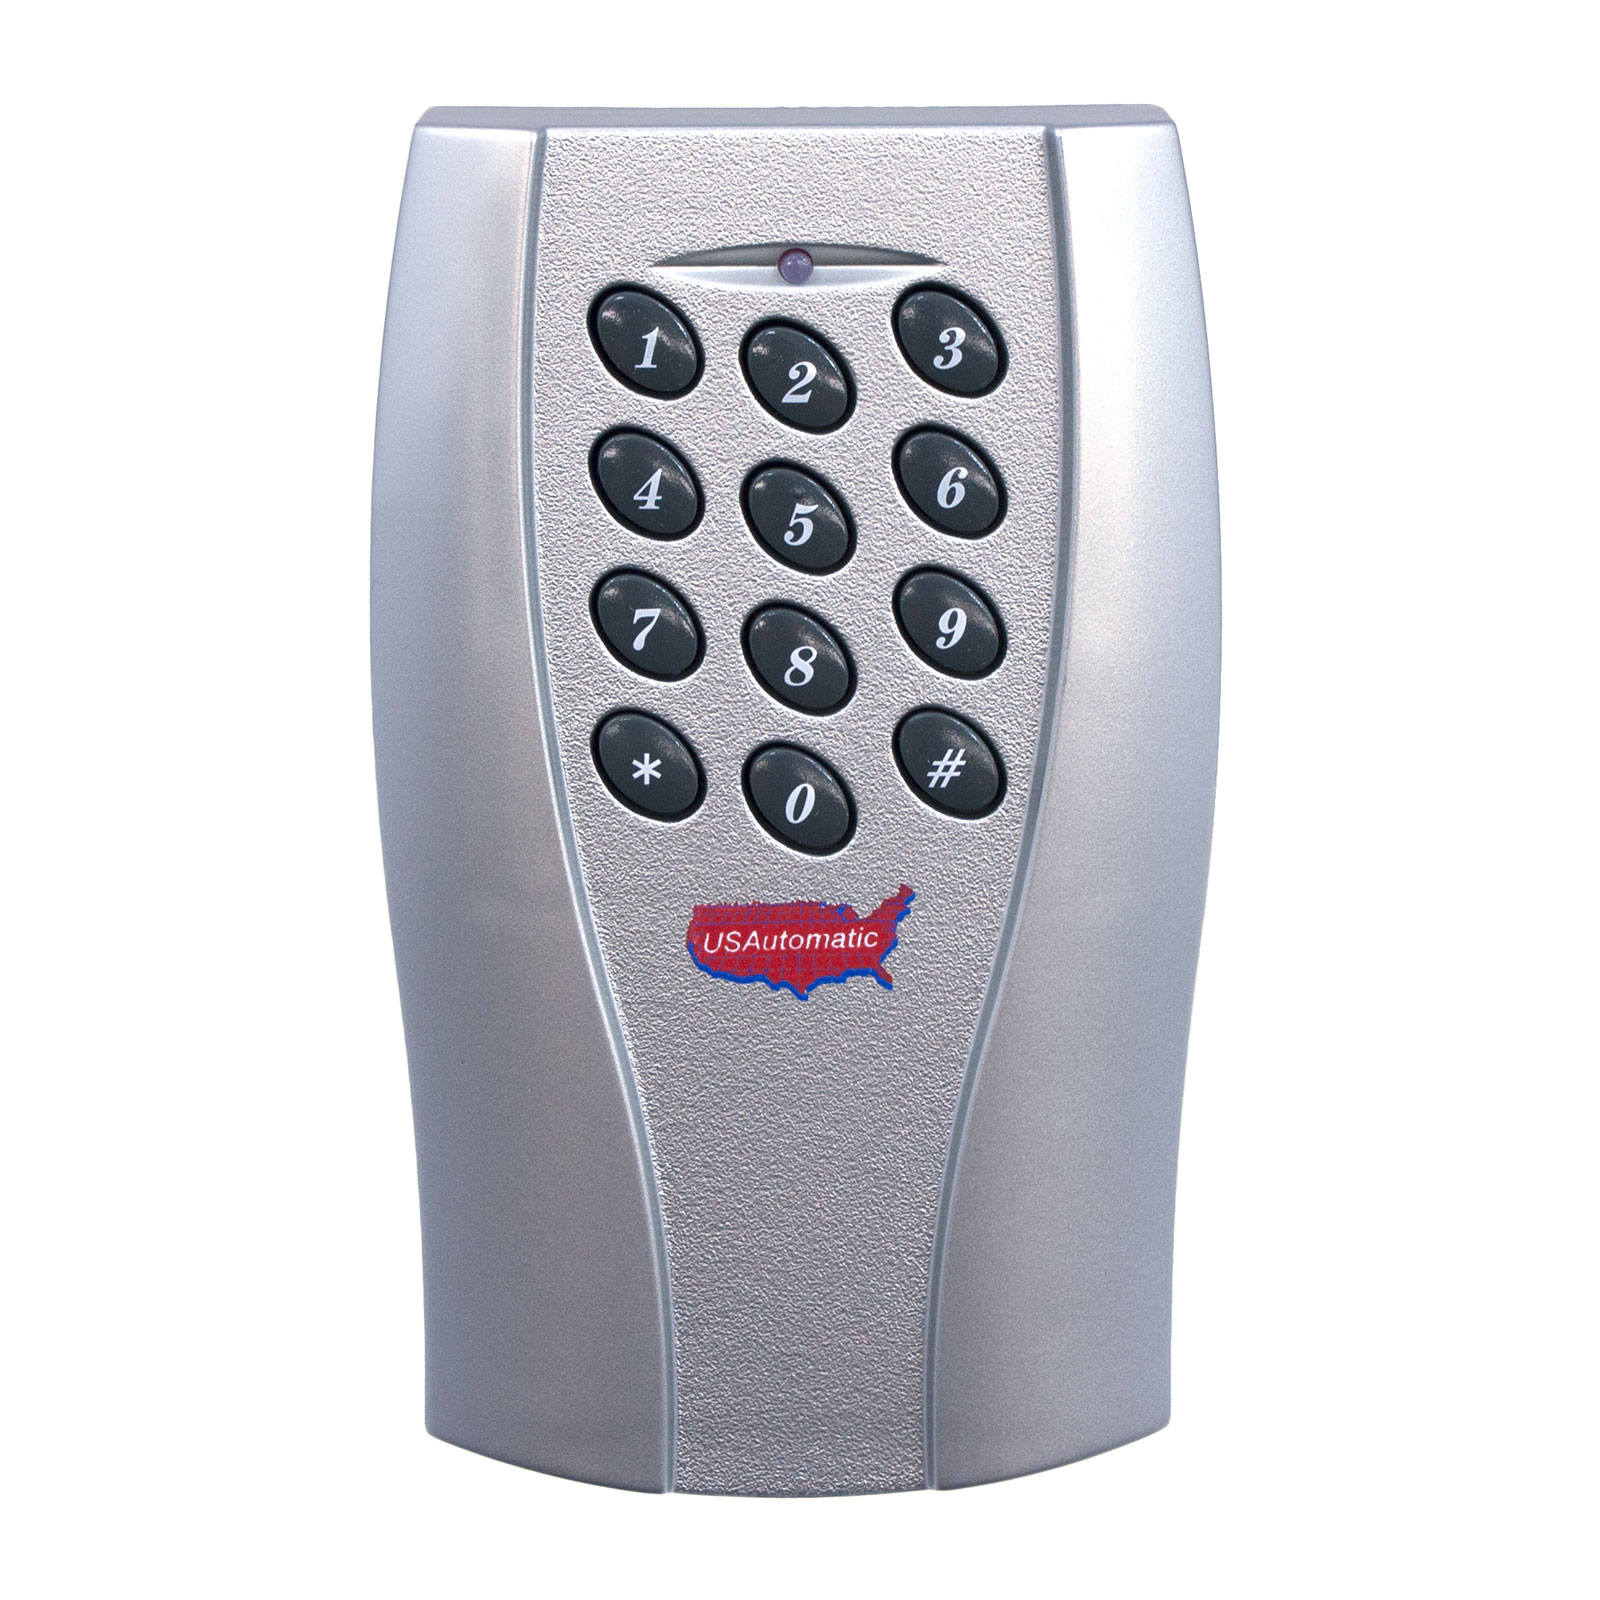 Shop Keypads and Entry Devices